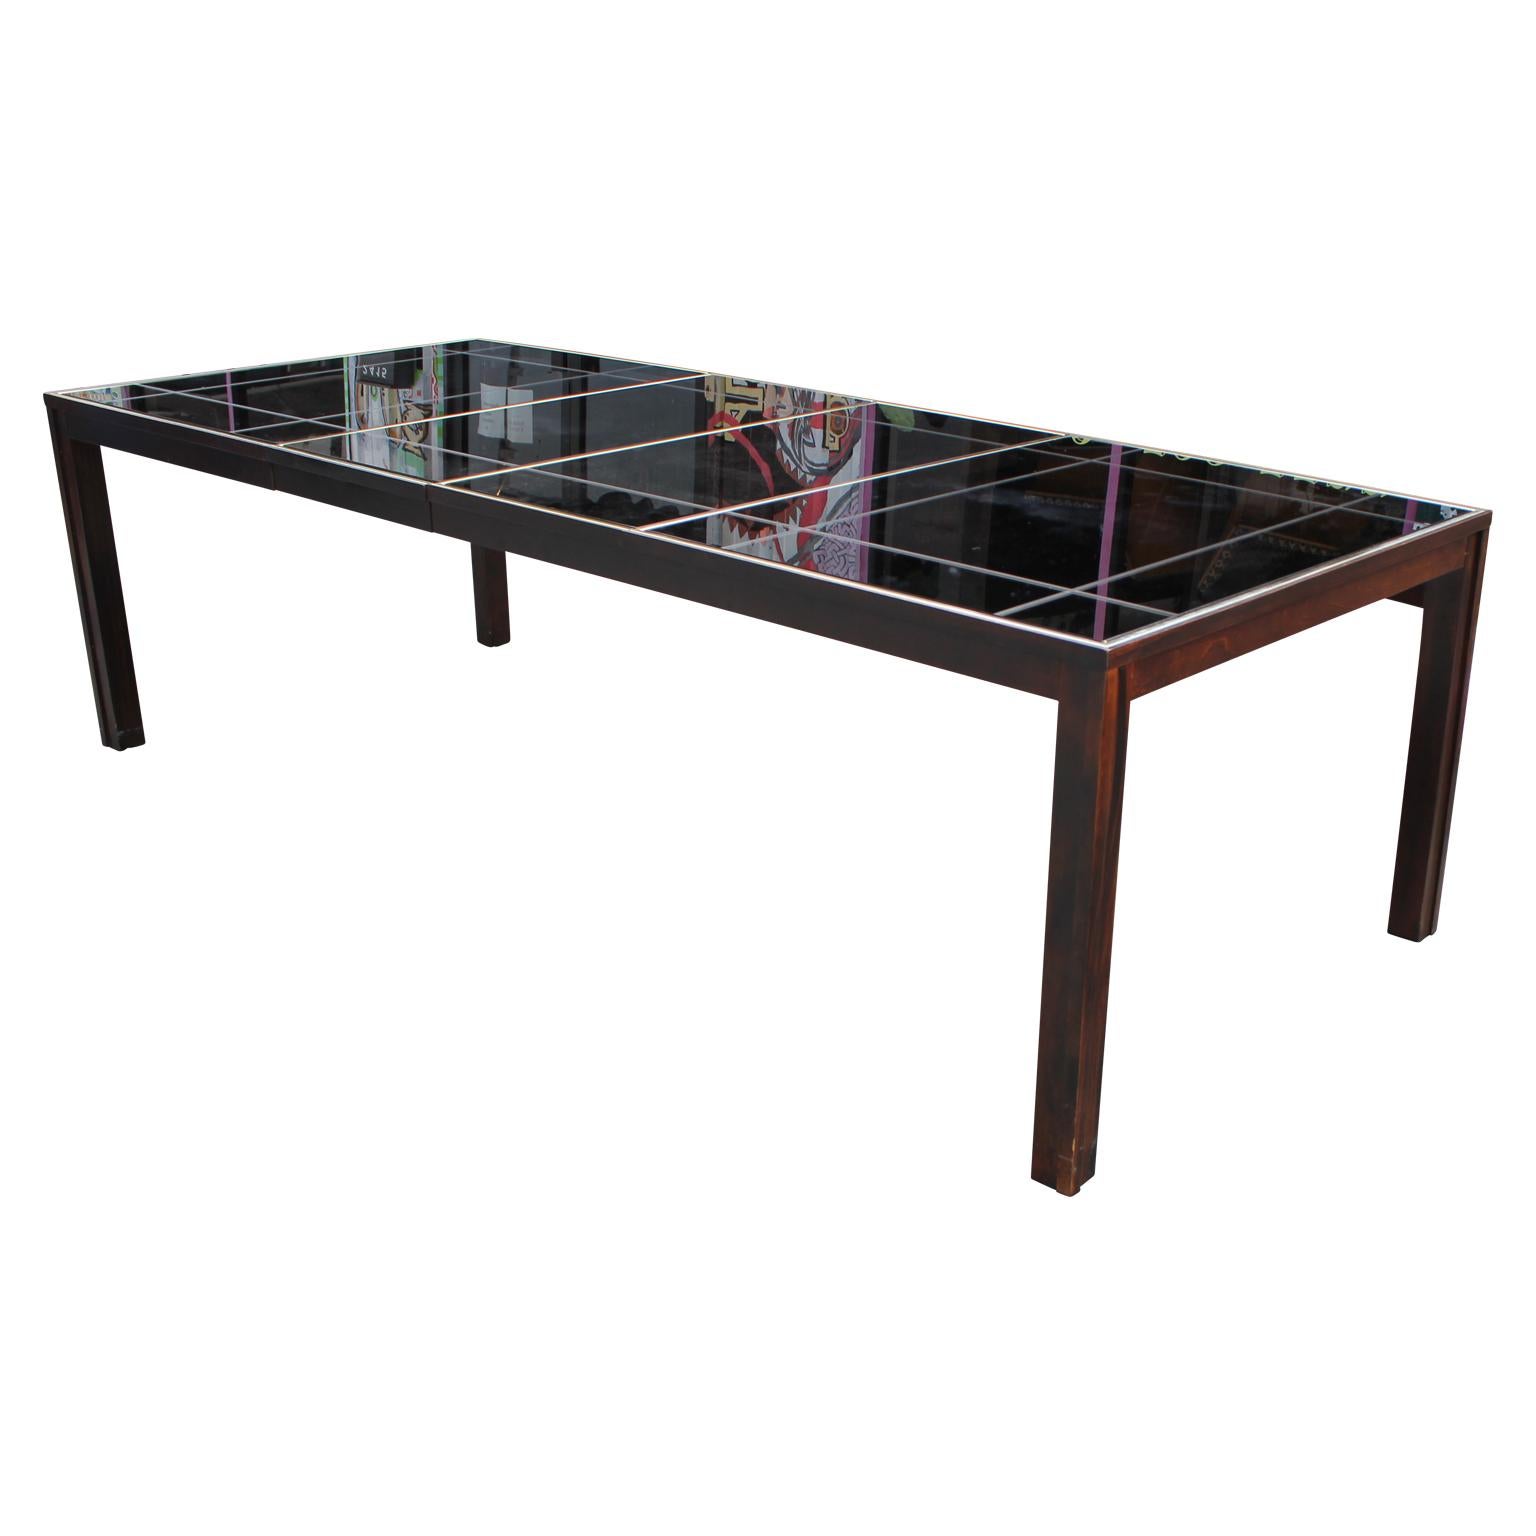 Modern Rectangular Black Dining Table with a Smoked Mirror Top and Brass Inlay